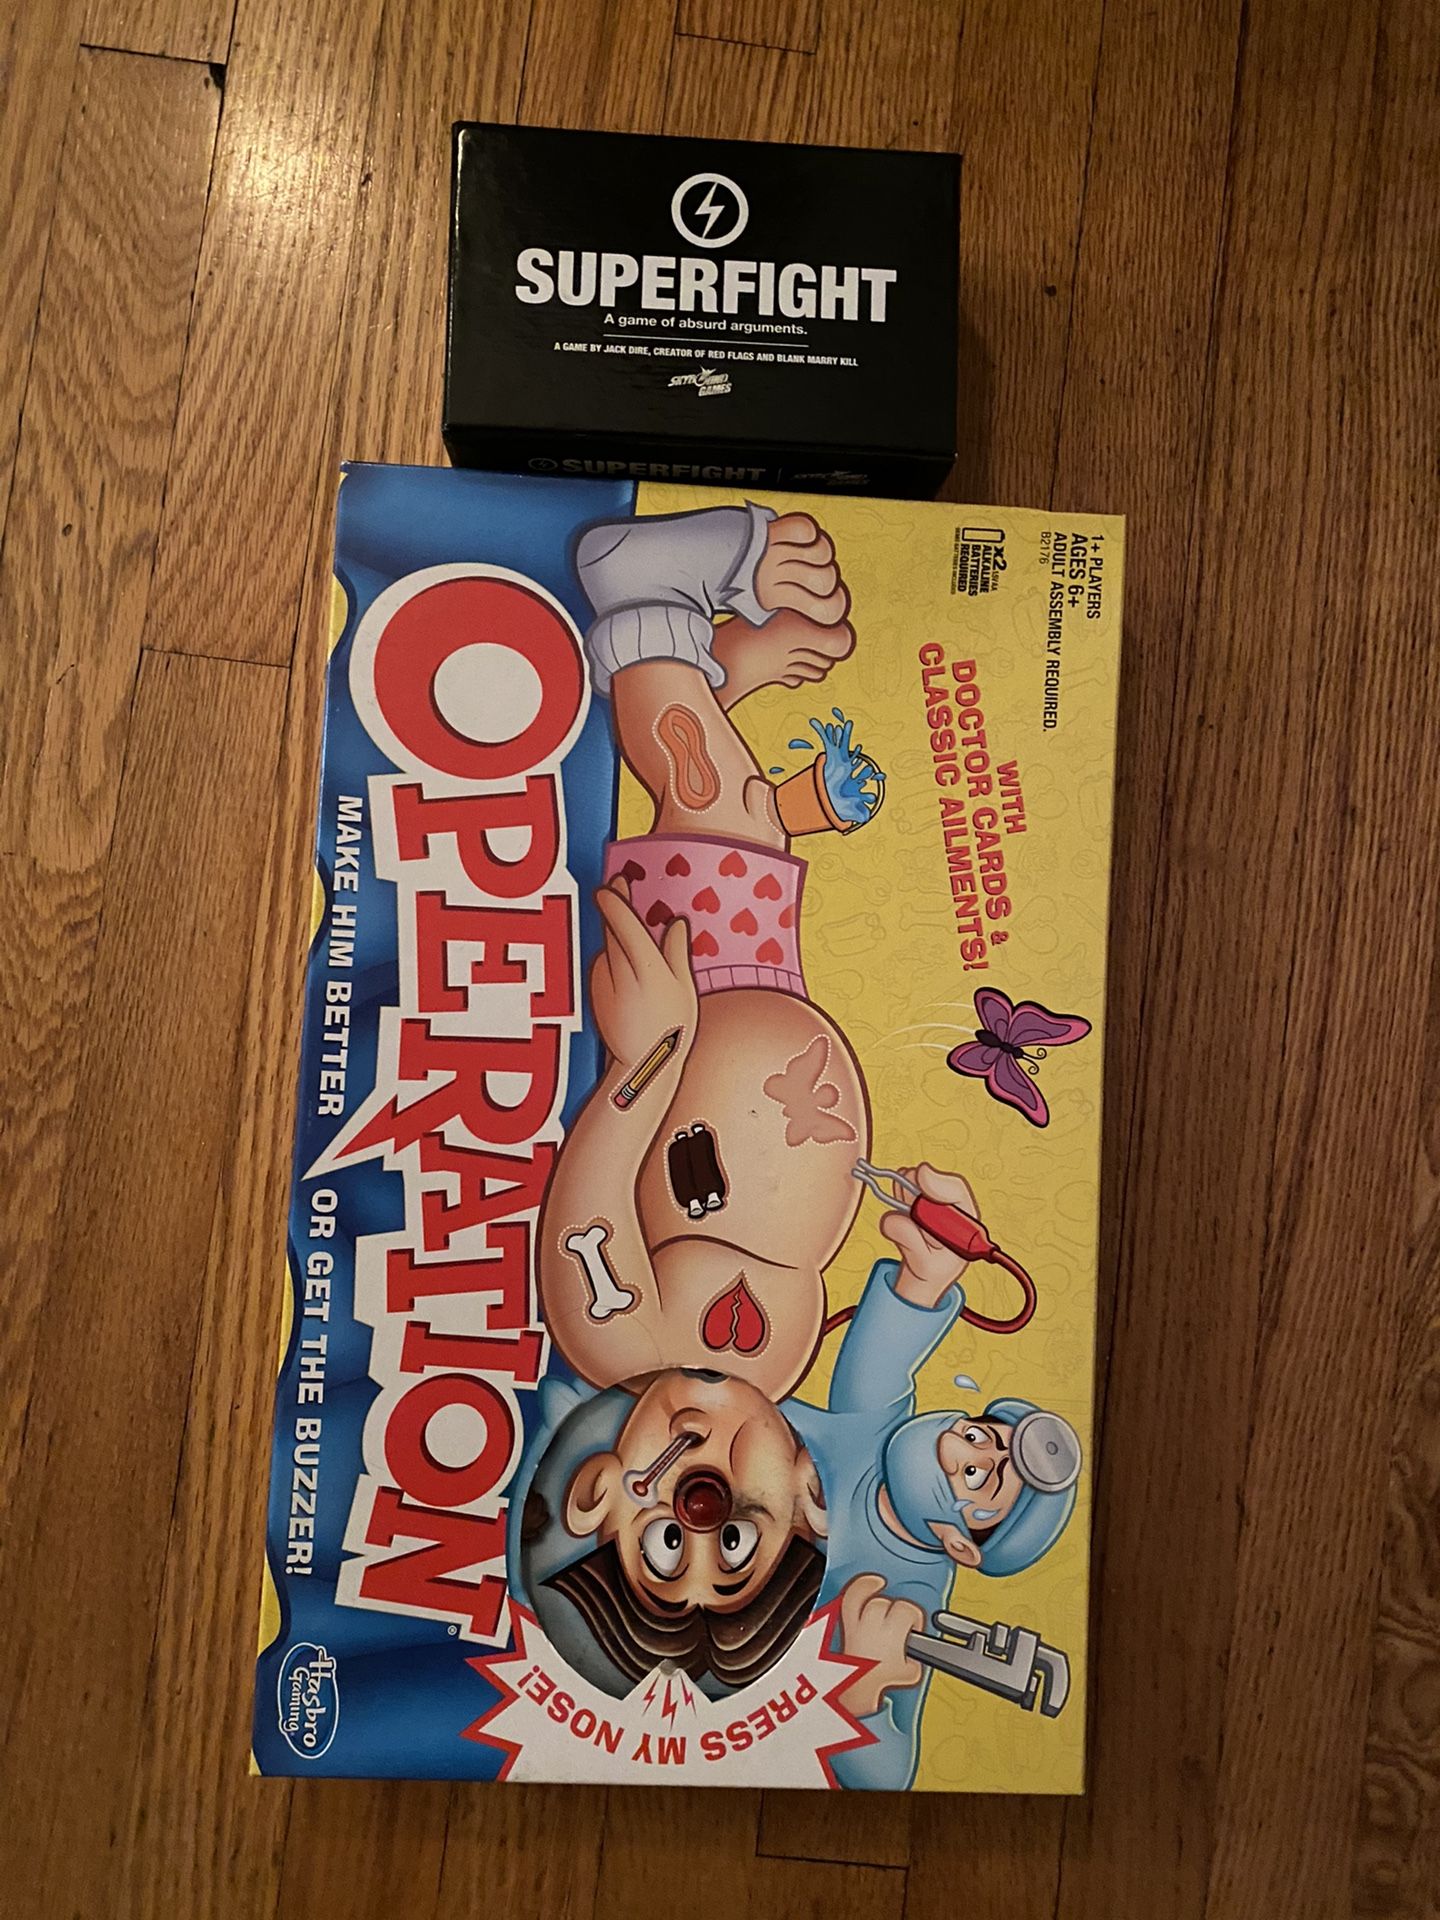 Operation game and superfight card games